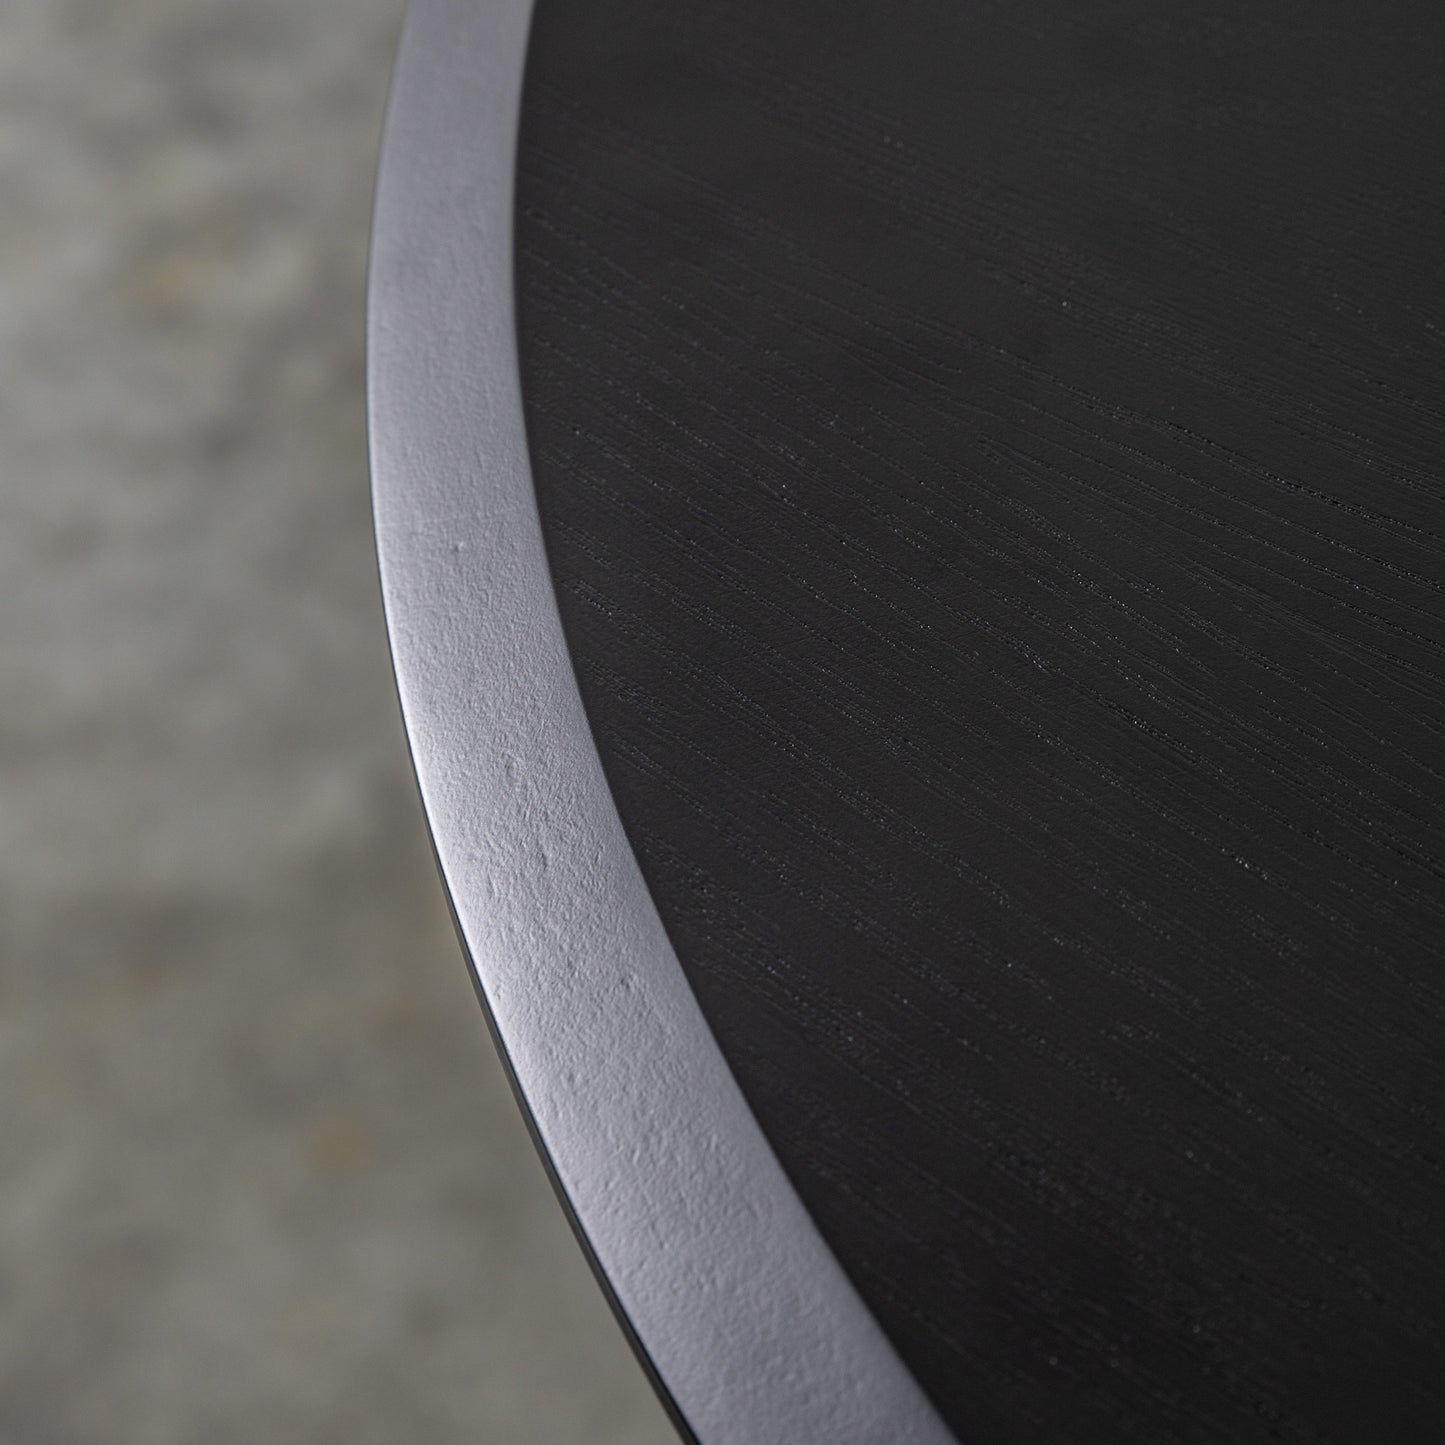 A close up of a Maddox Round Dining Table with a metal base, suitable for interior decor and home furniture.